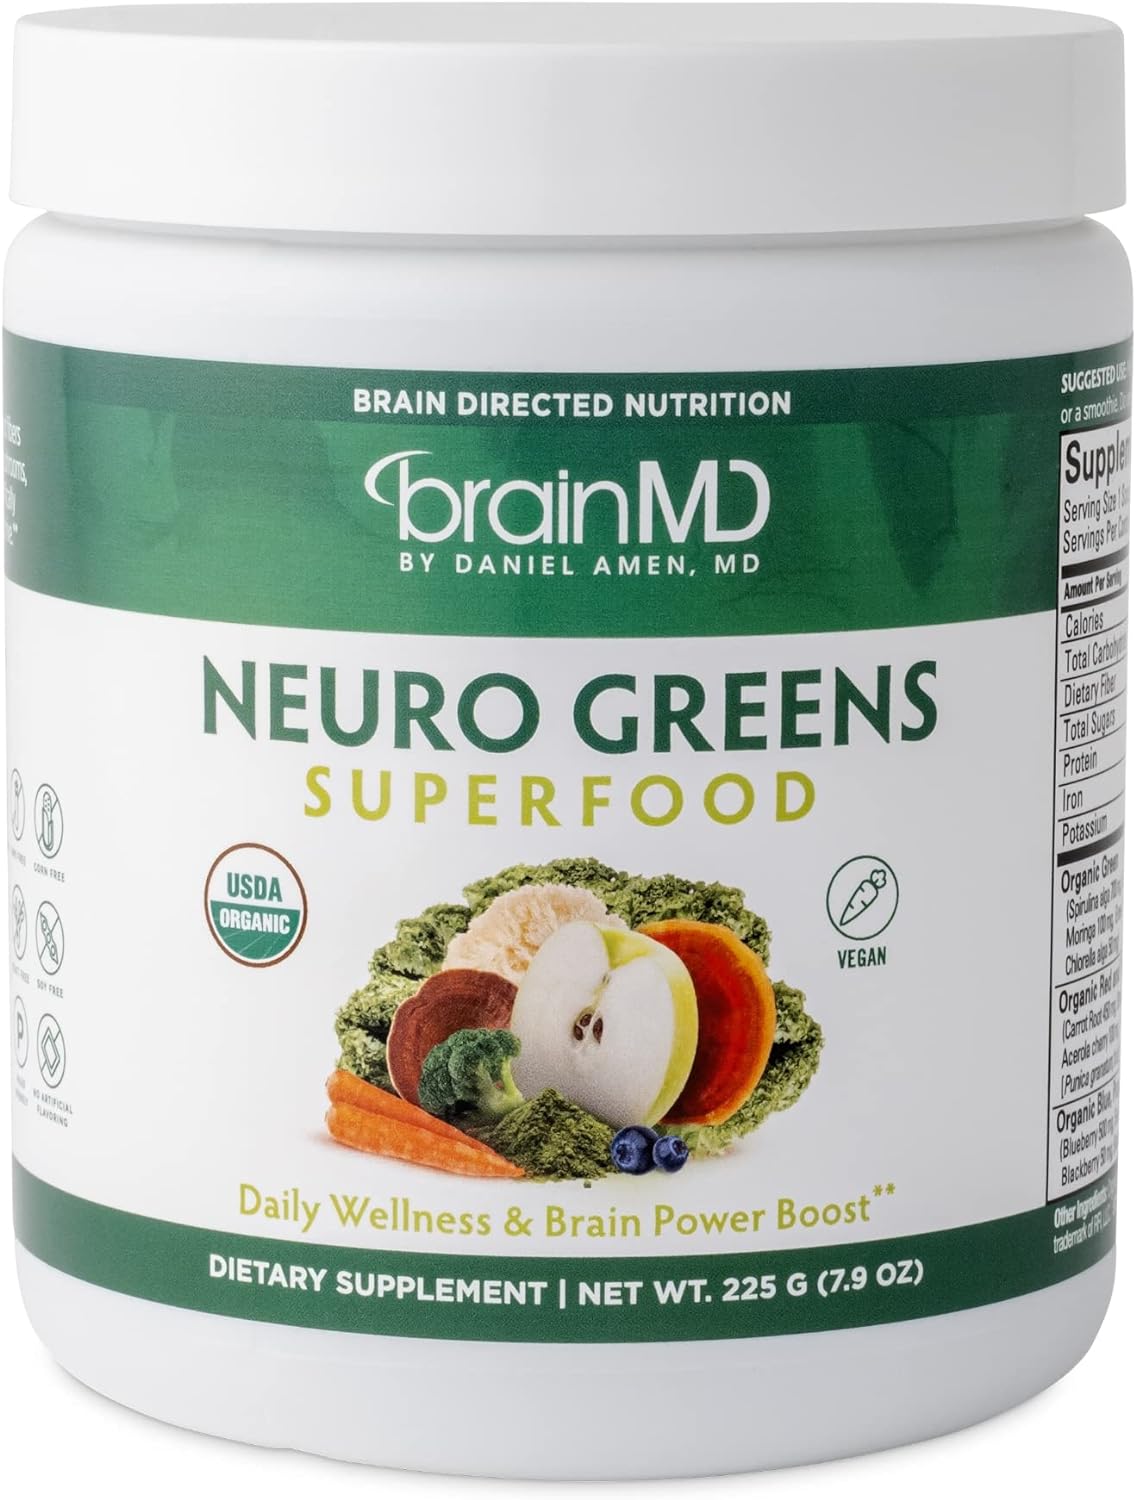 BRAINMD Dr Amen Neuro Greens Superfood - 7.9 oz - Supports Whole-Body